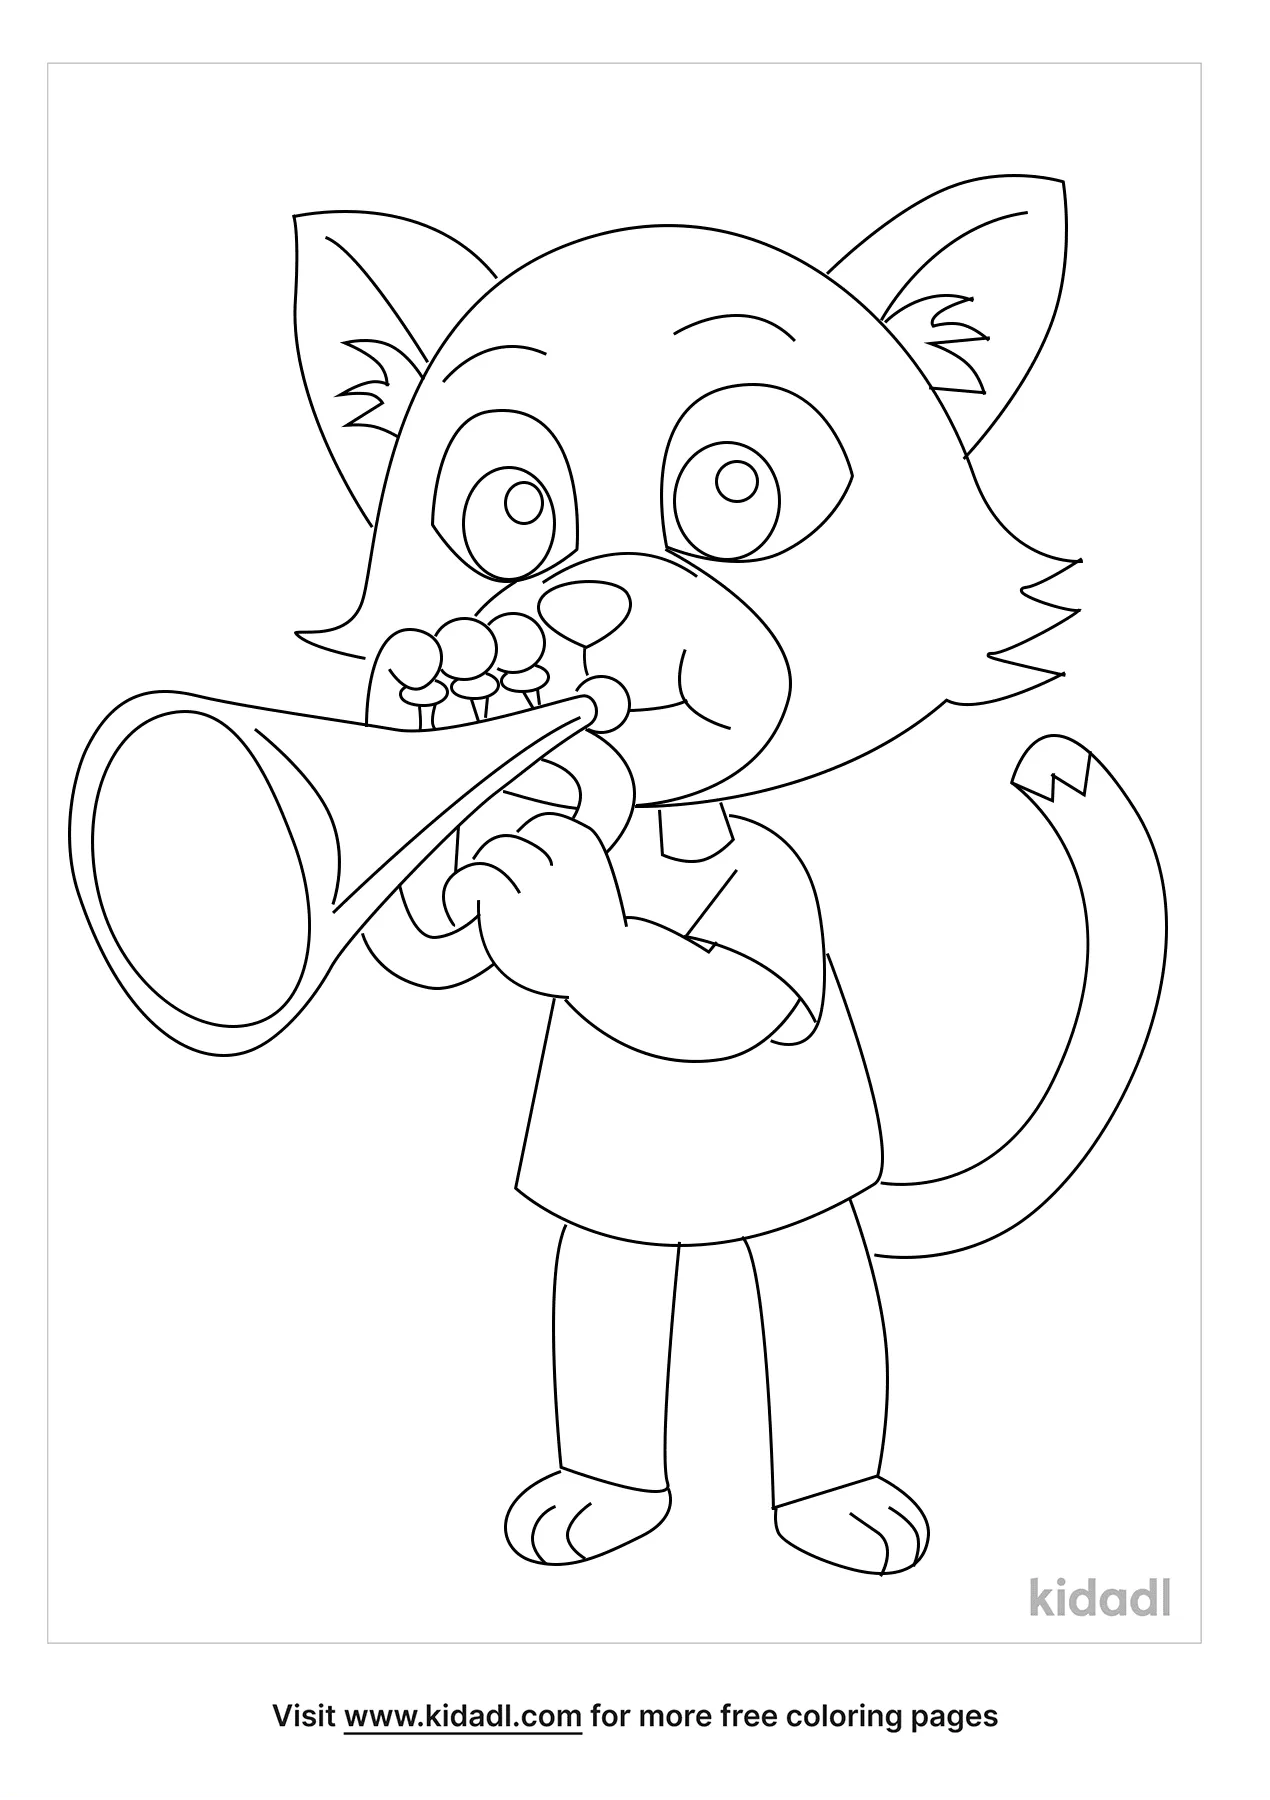 Free Cat Playing Trumpet Coloring Page | Coloring Page Printables | Kidadl